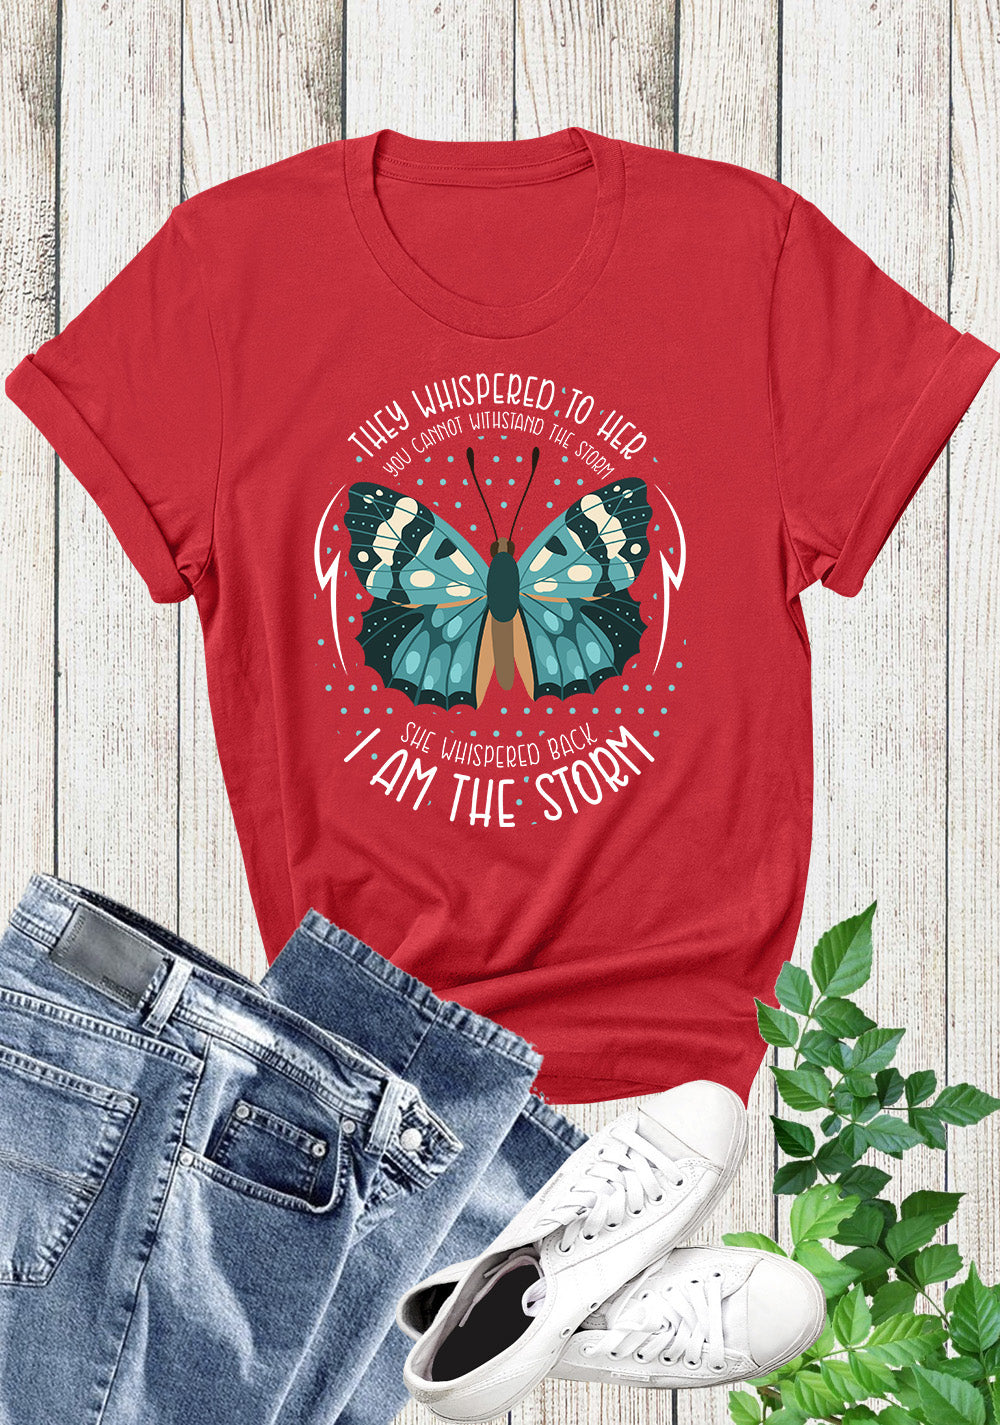 They Whispered to Her You Cannot Withstand the Storm Shirt